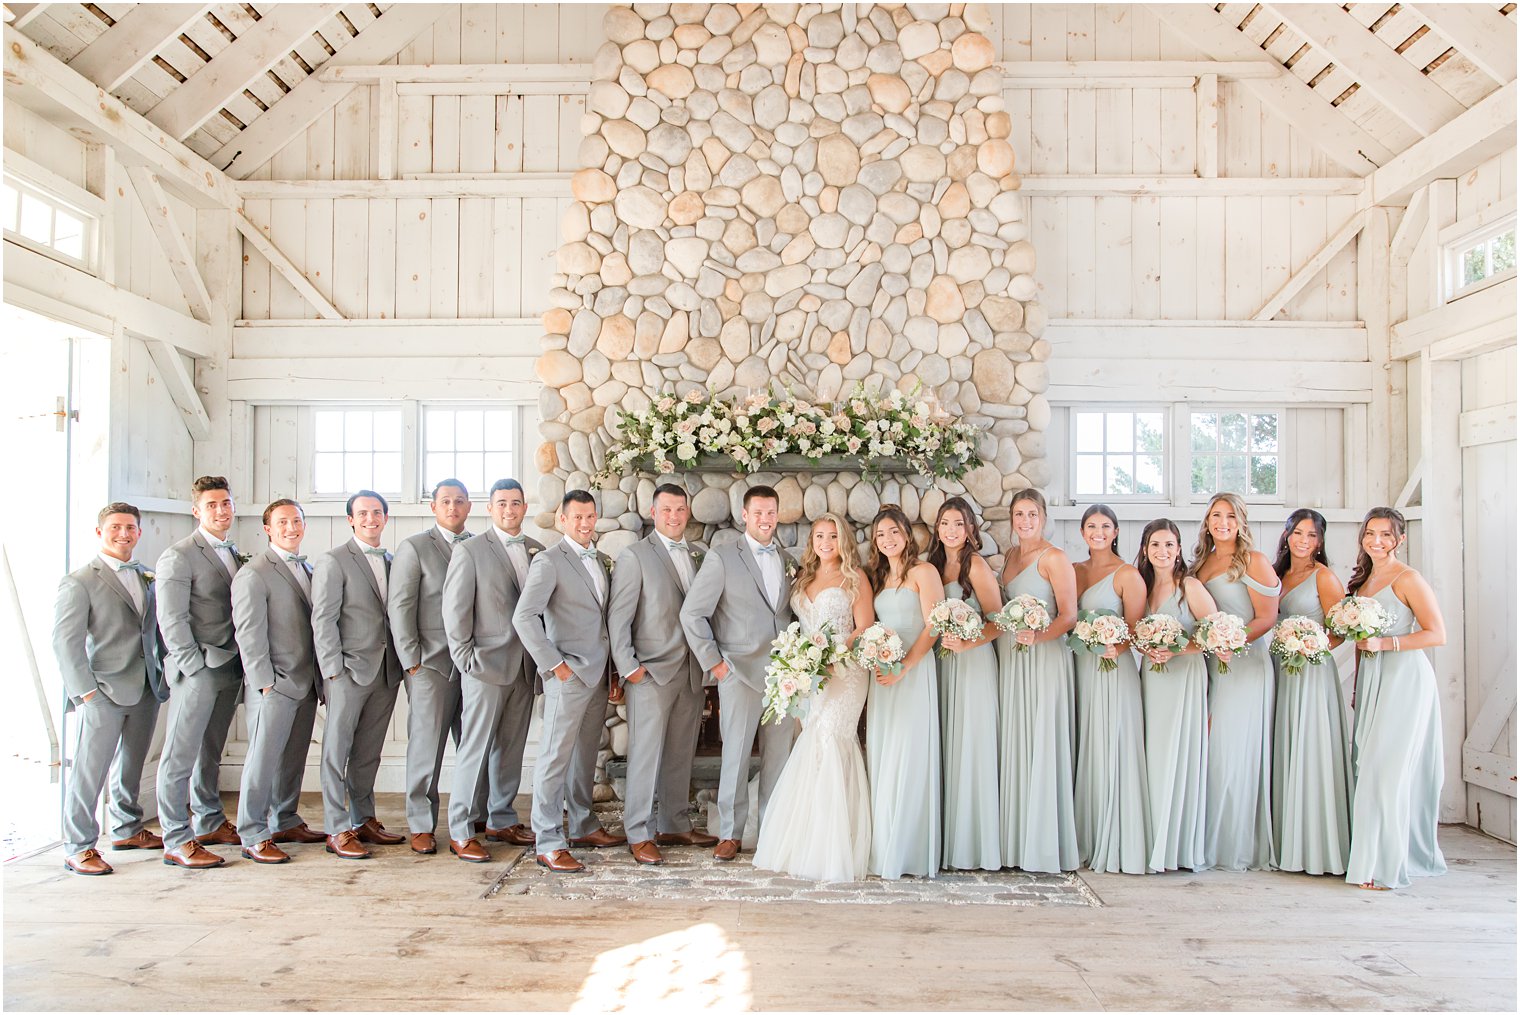 newlyweds pose with wedding party in grey suits and light blue gowns by stone fireplace